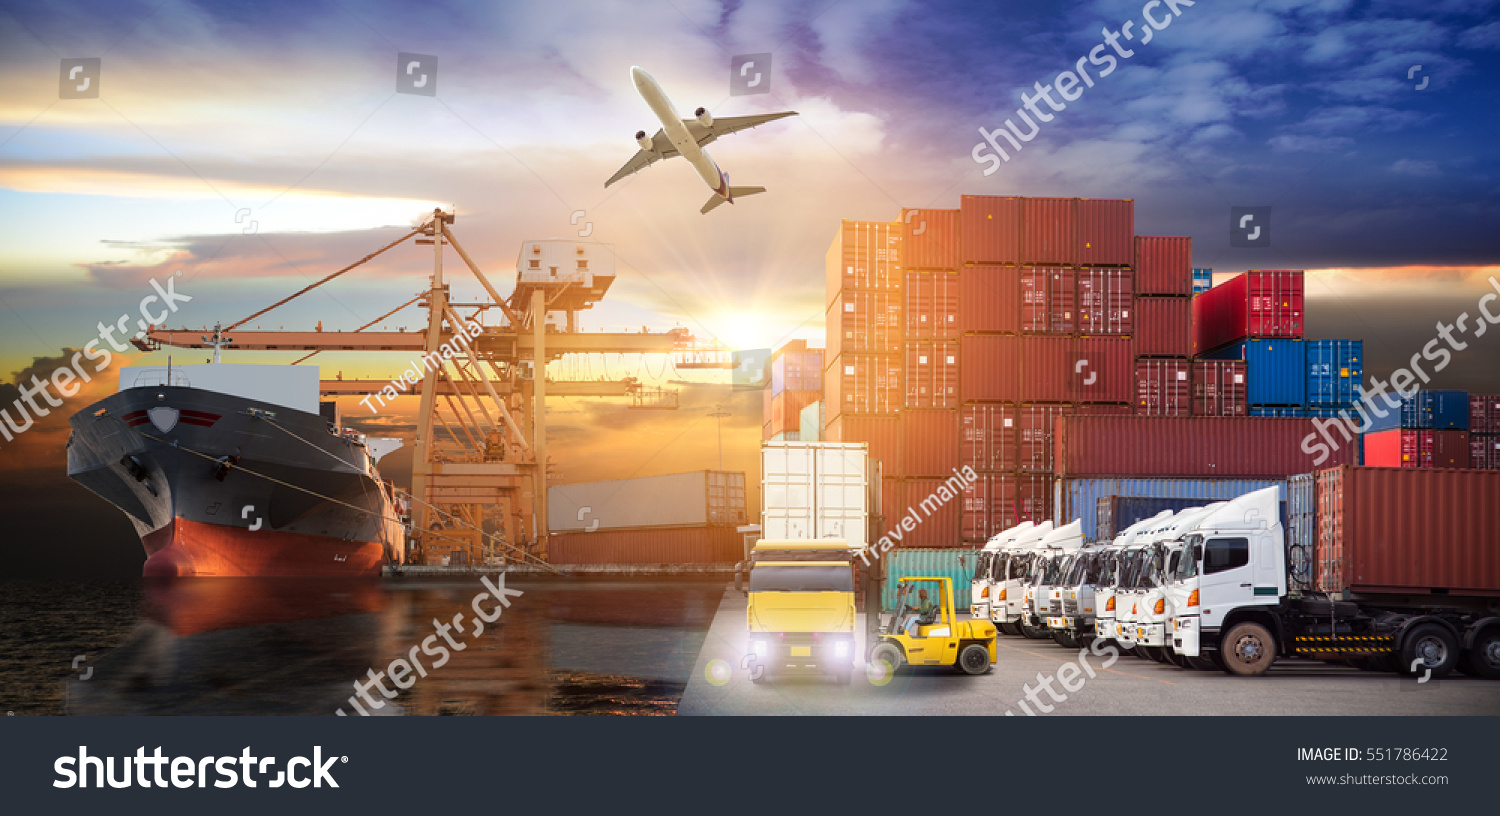 Logistics and transportation of Container Cargo ship and Cargo plane with working crane bridge in shipyard at sunrise, logistic import export and transport industry background #551786422